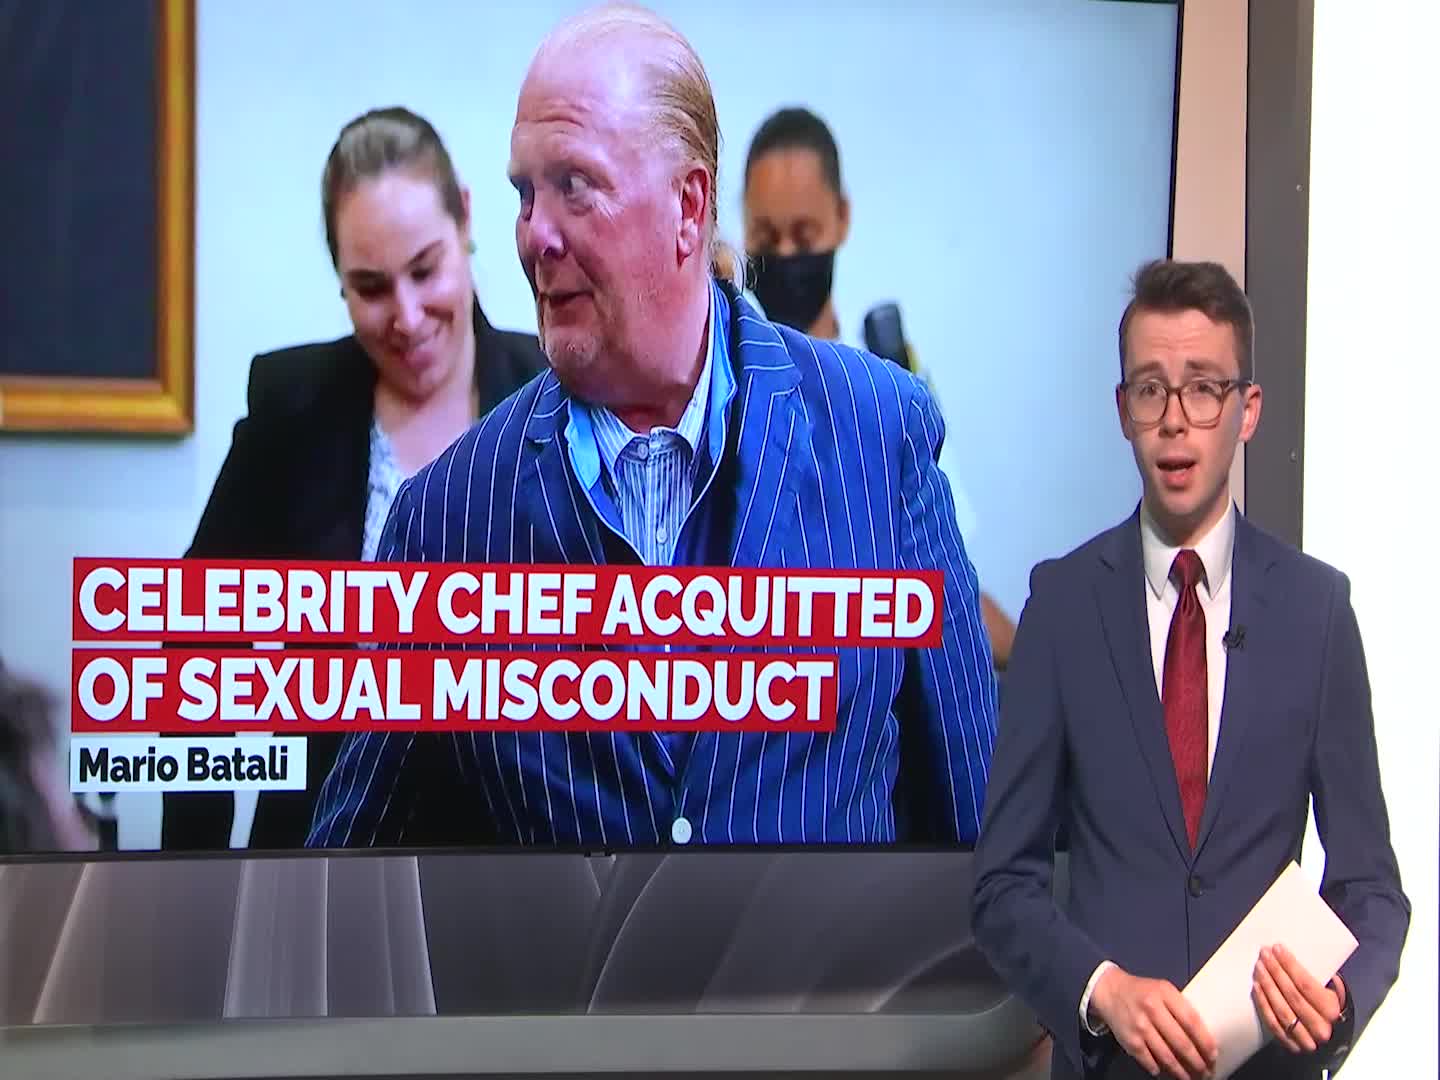 Celebrity chef Mario Batali acquitted of sexual misconduct